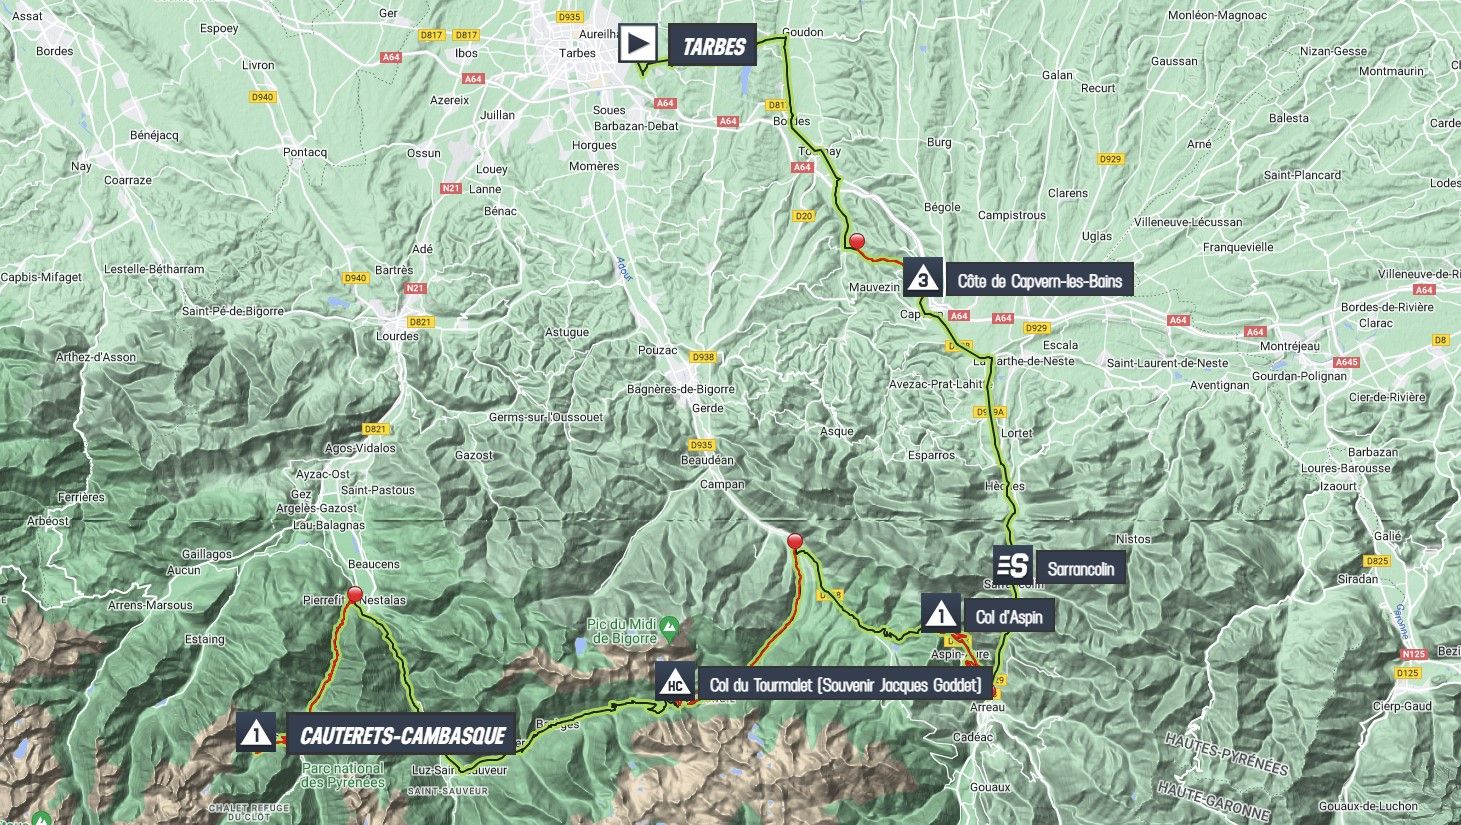 PREVIEW | Tour de France 2023 stage 6 - Jai Hindley's first day in yellow, Cauterets summit finish threatens new attack from Jonas Vingegaard